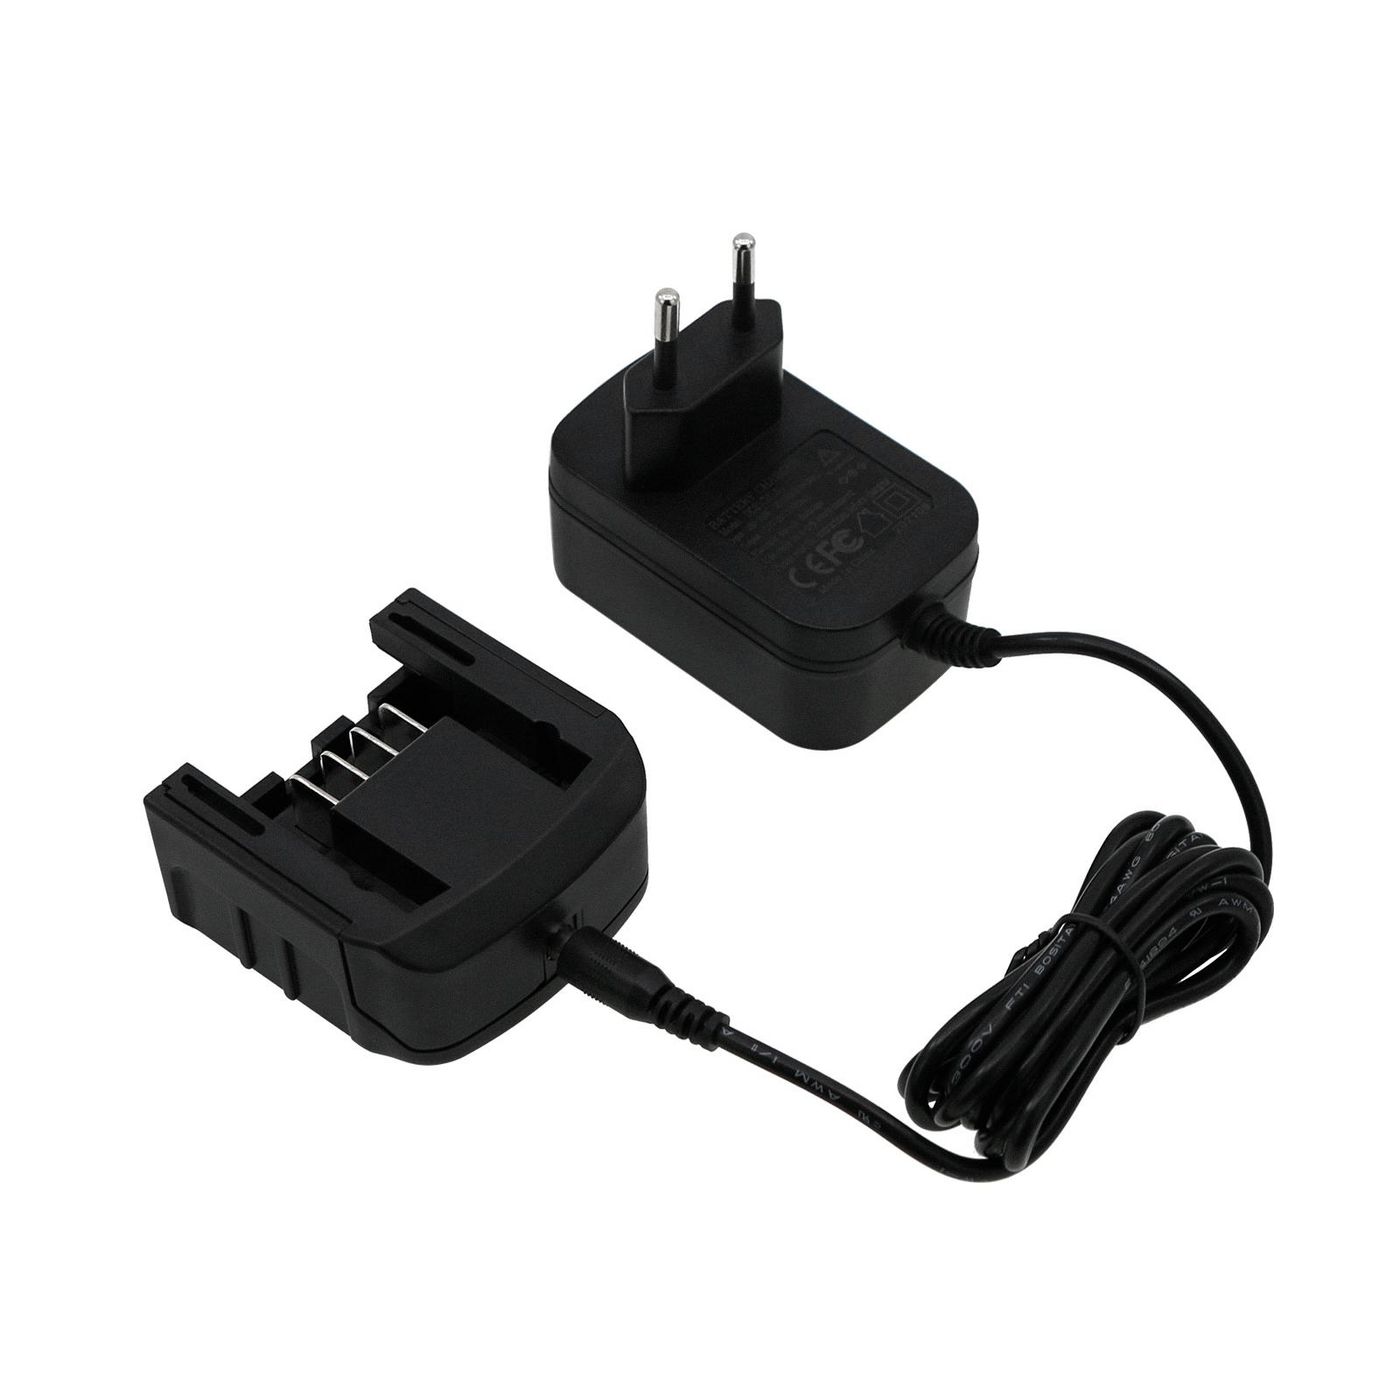 Charger for Black & Decker